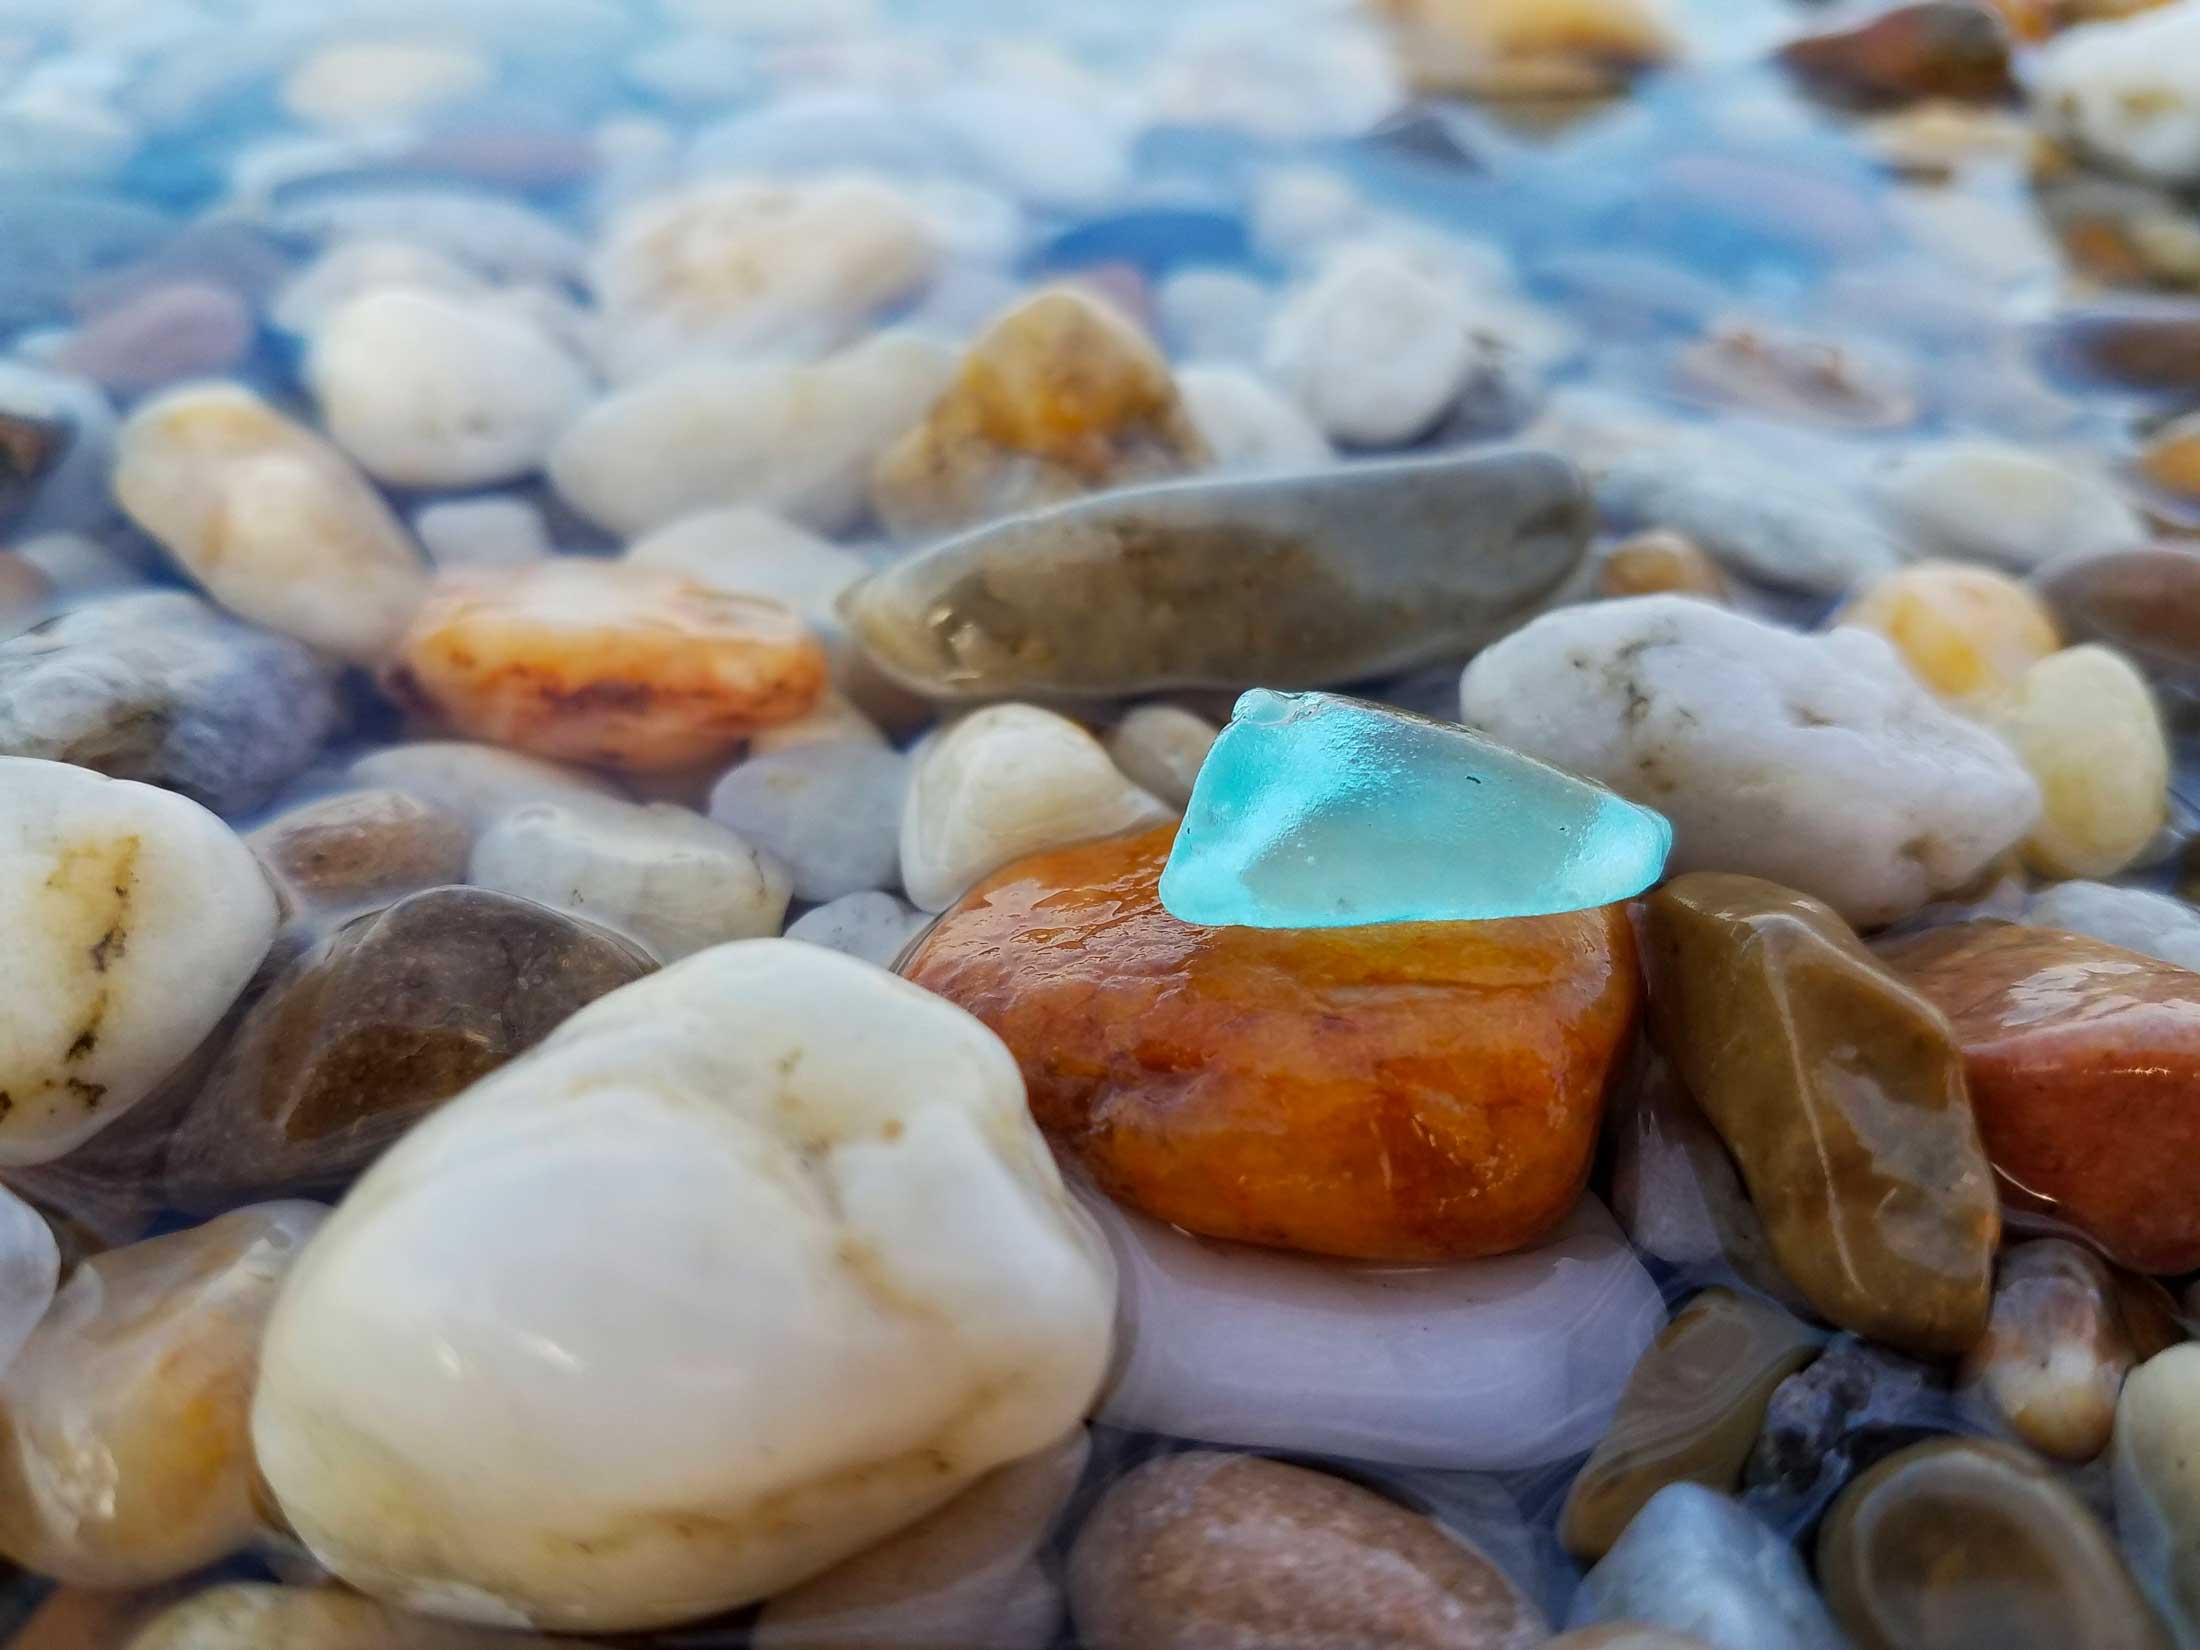 Blue sea glass with pebbles on a Maryland beach